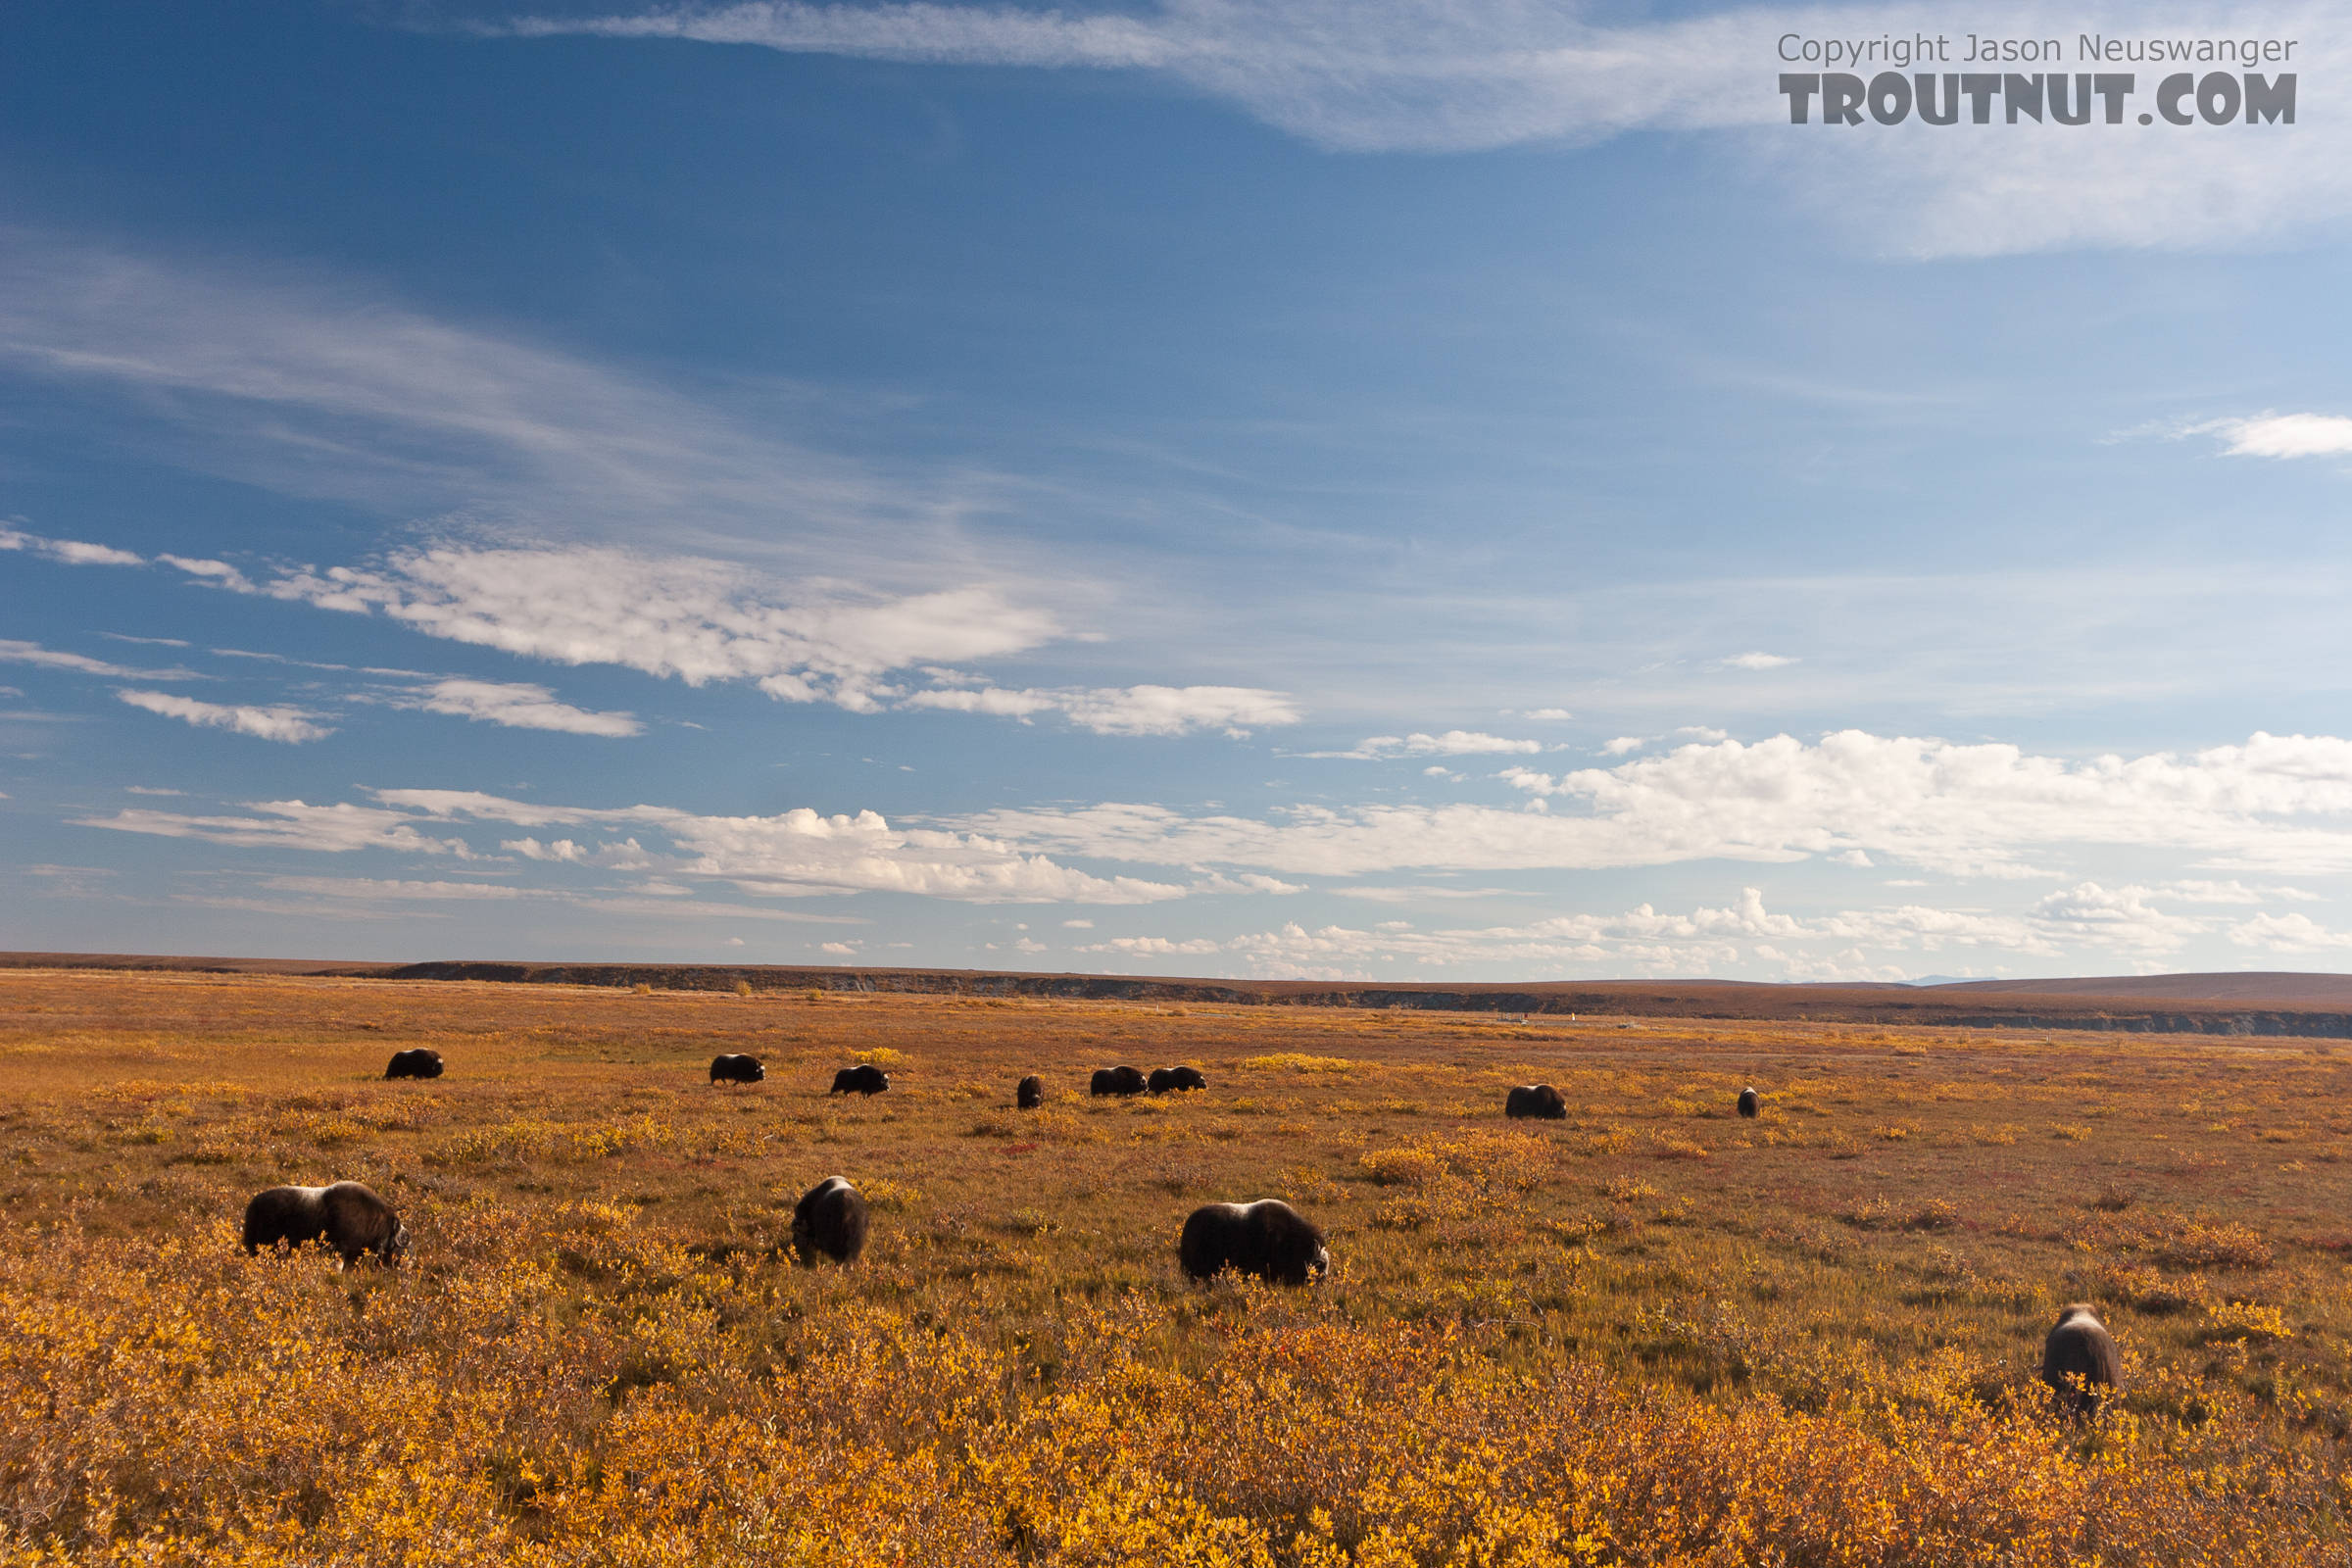 More of the same herd of musk oxen. From Dalton Highway in Alaska.